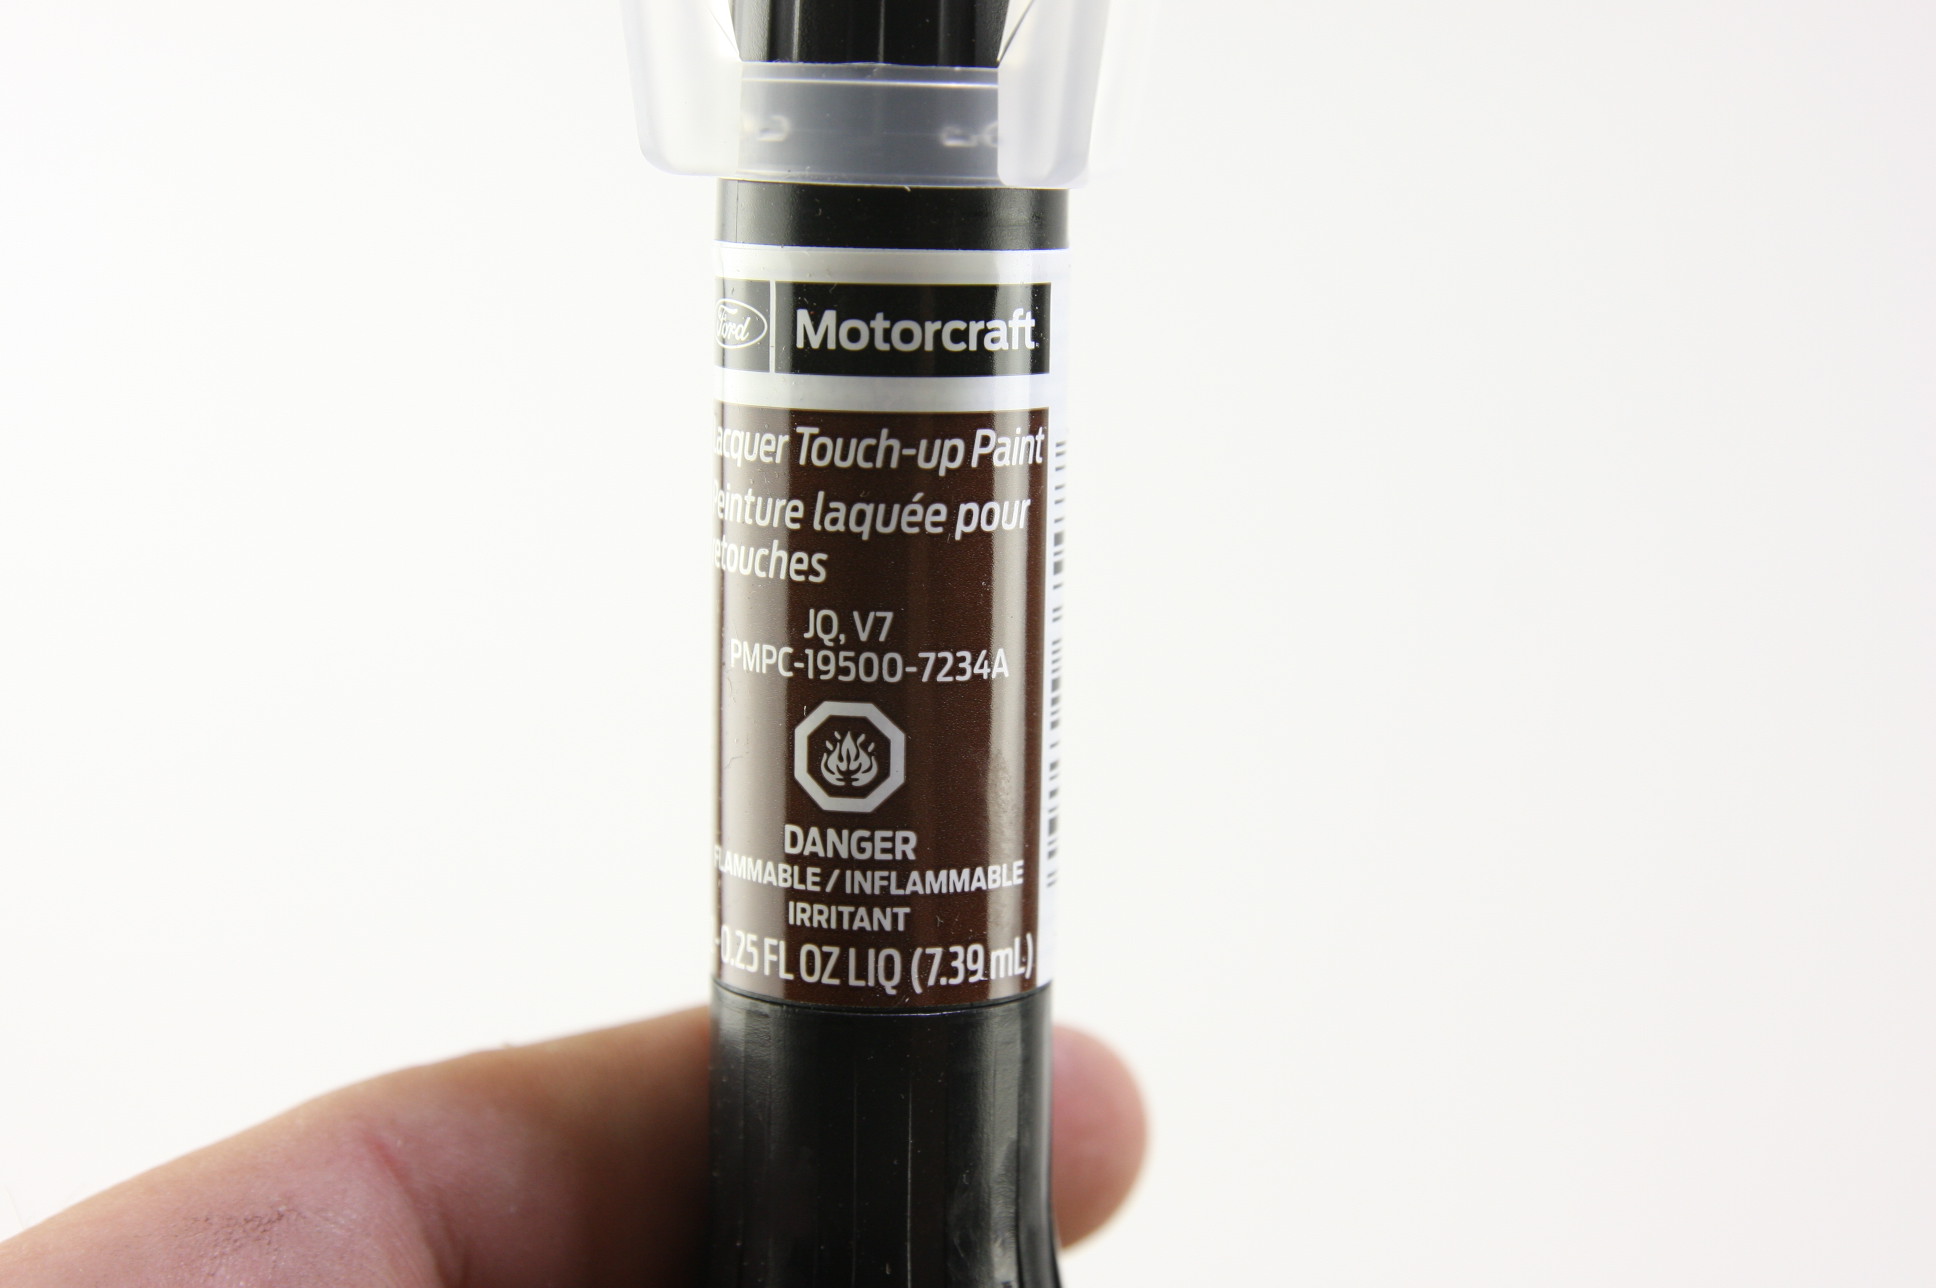 New OEM PMPC195007234A Ford Motorcraft Golden Bronze JQ V7 touch up paint NIP - image 2